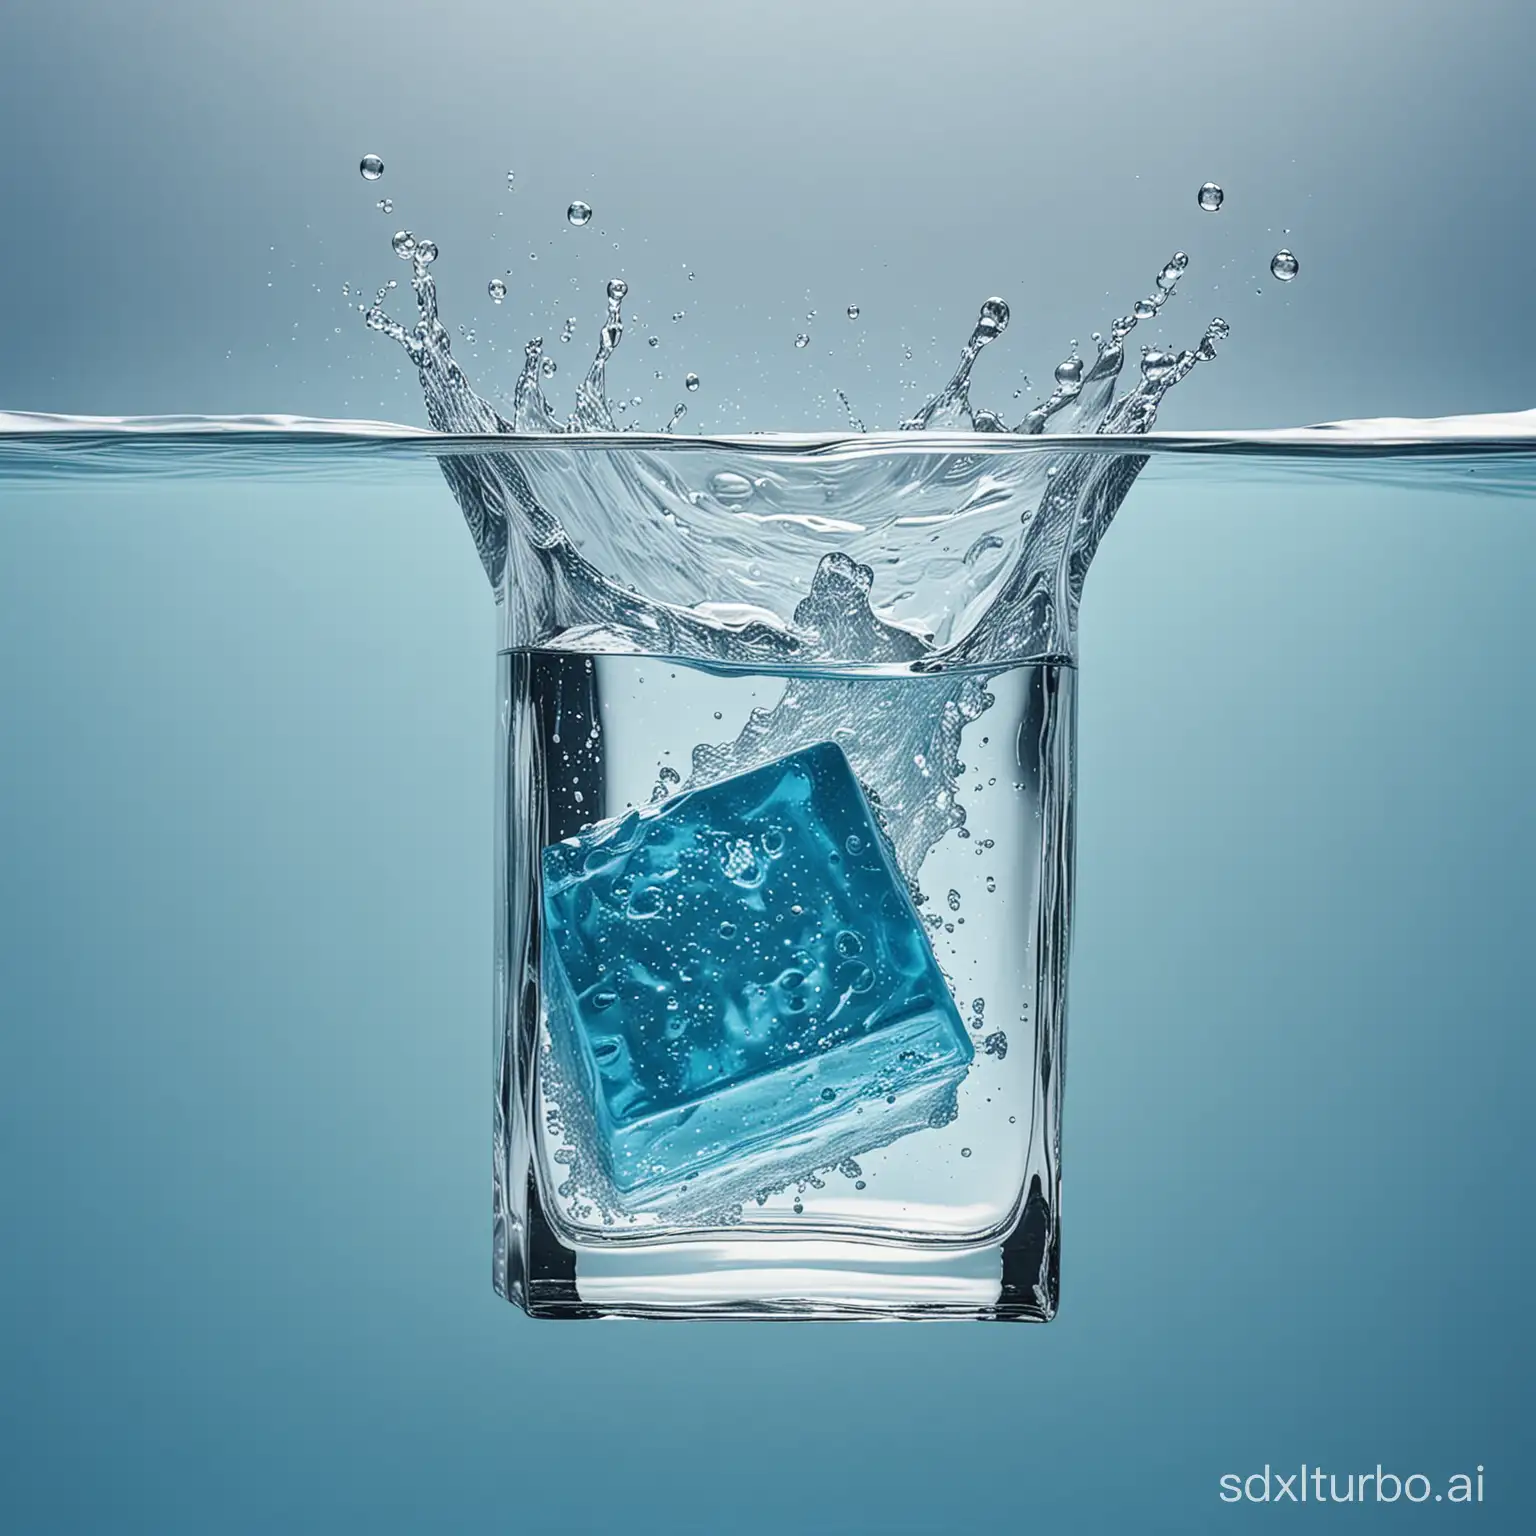 A skincare product falls into the water, splashing water, with half of the skincare product submerged in the water. Side view, transparent glass packaging, overall color tending towards blue.